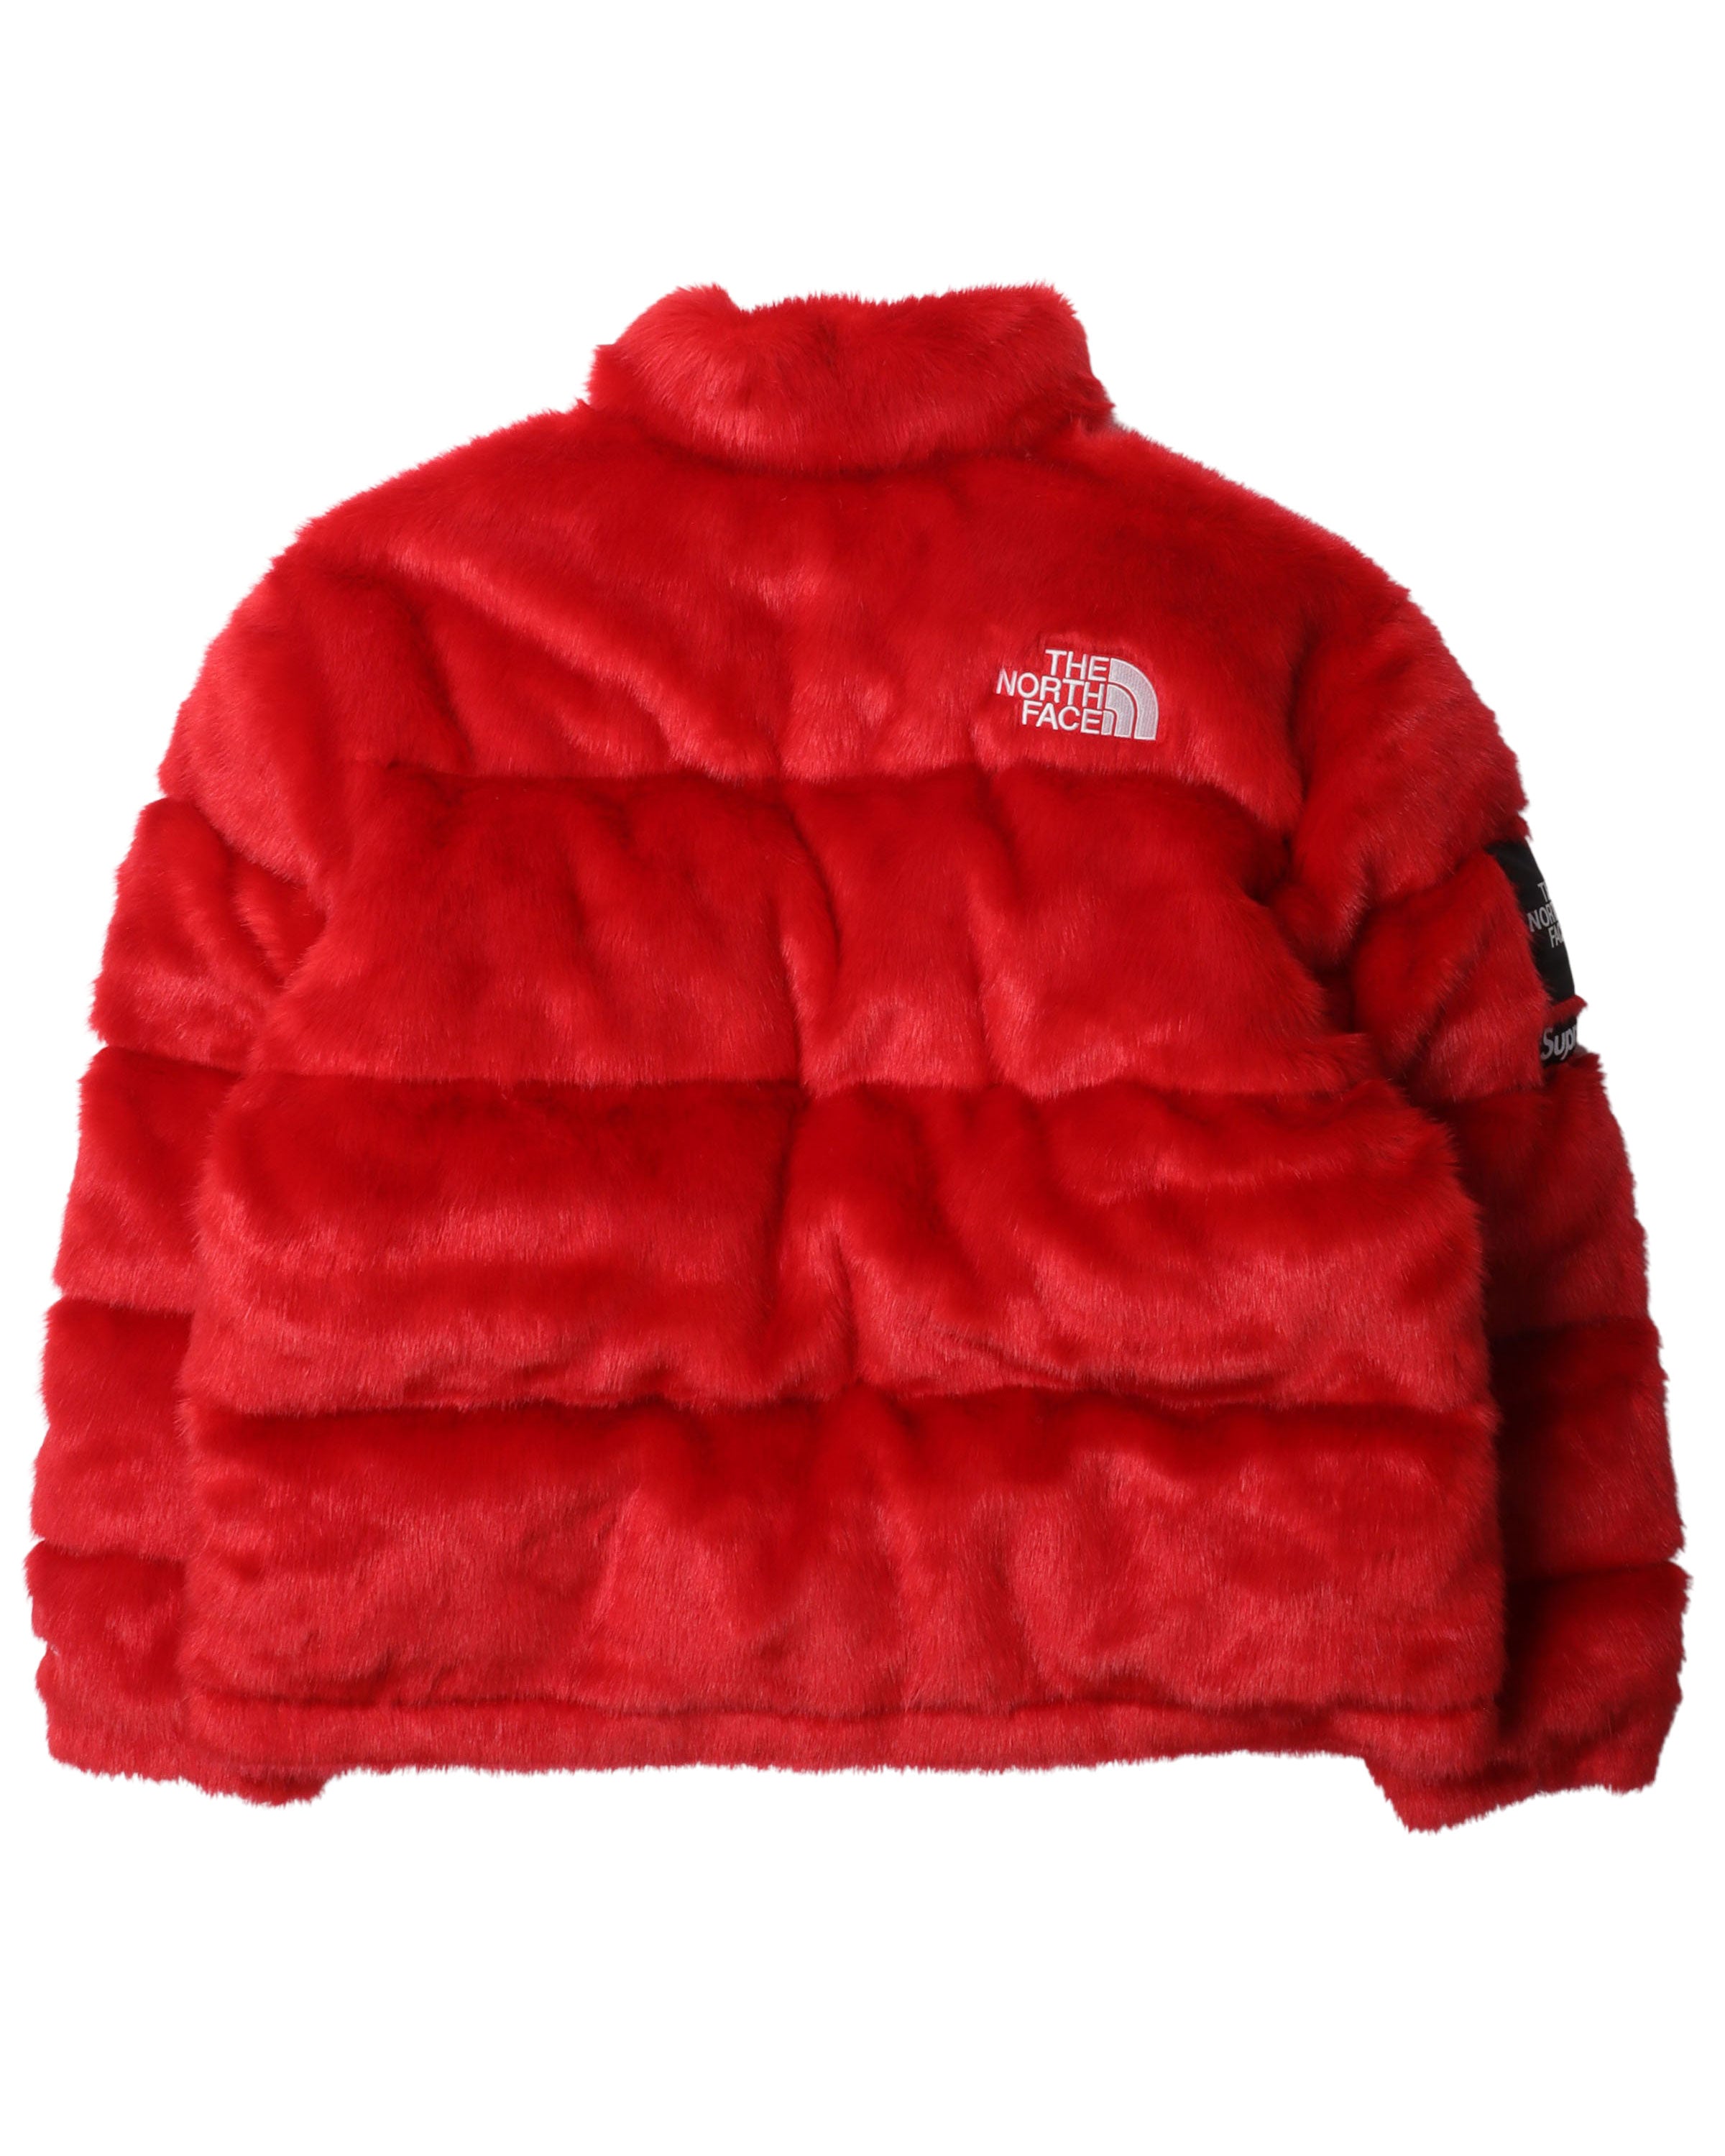 The North Face Faux Fur Jacket